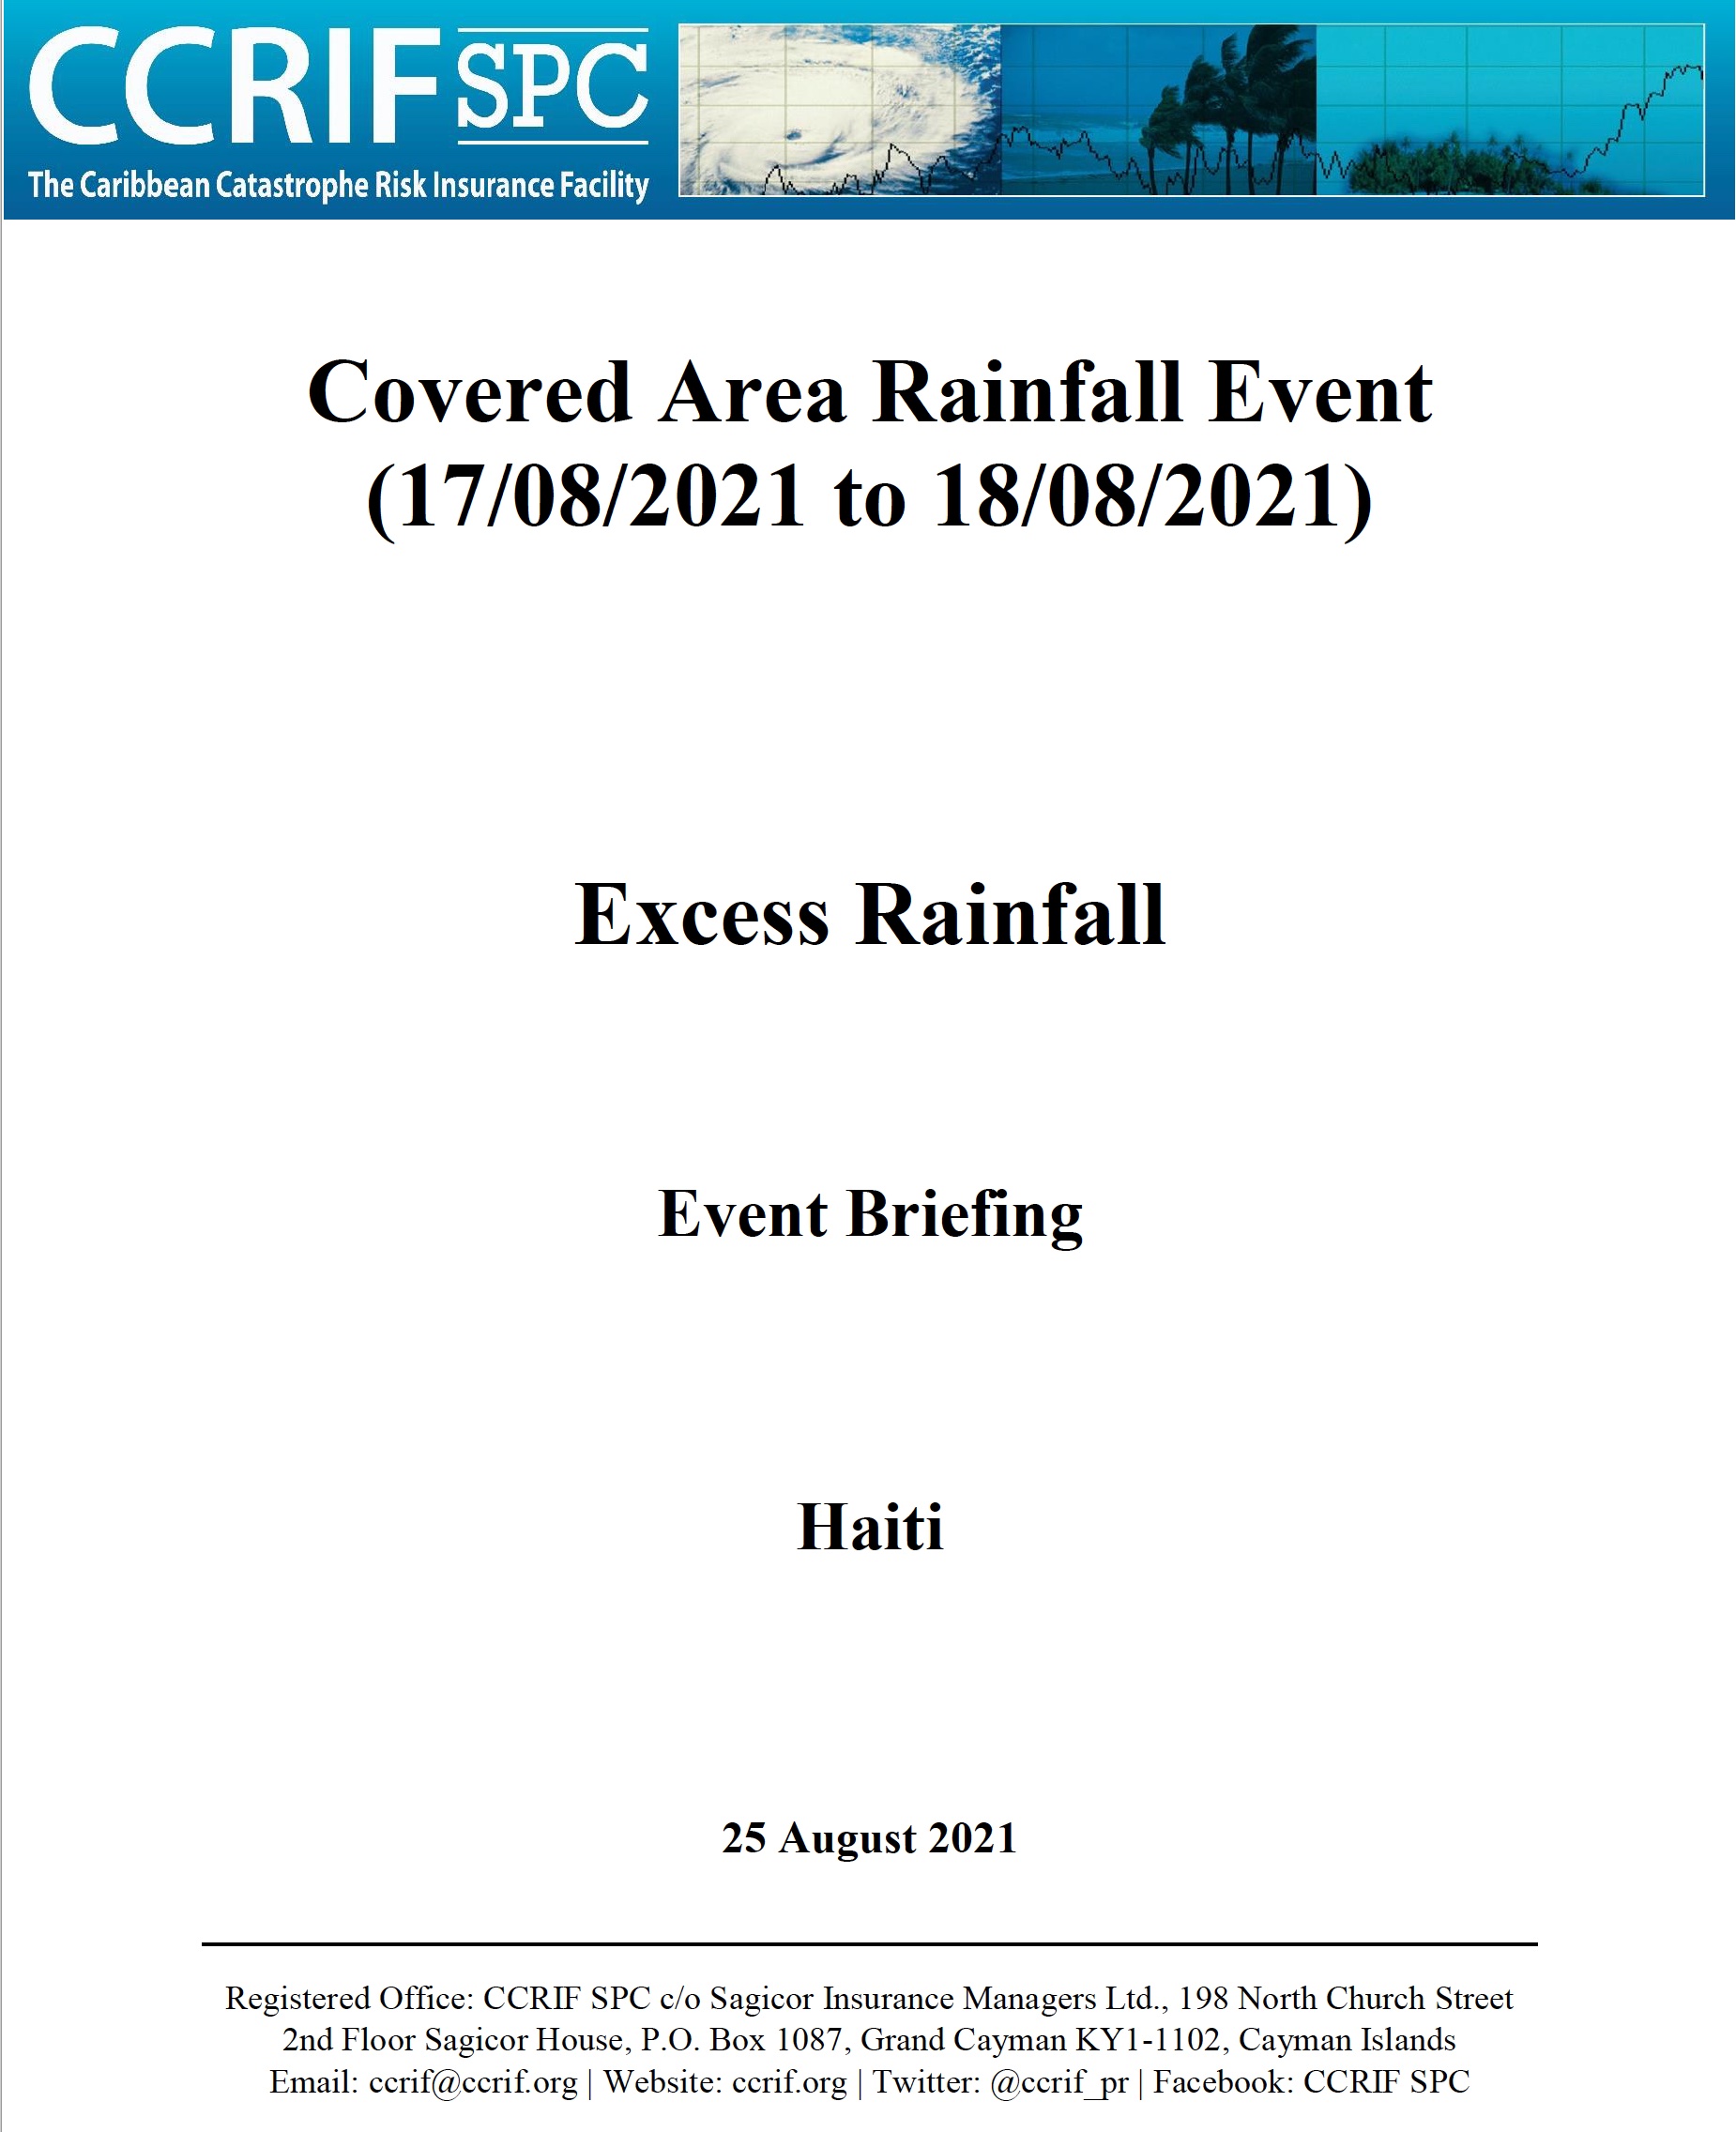 Event Briefing - Covered Area Rainfall Event - Excess Rainfall - Haiti - August 25 2021